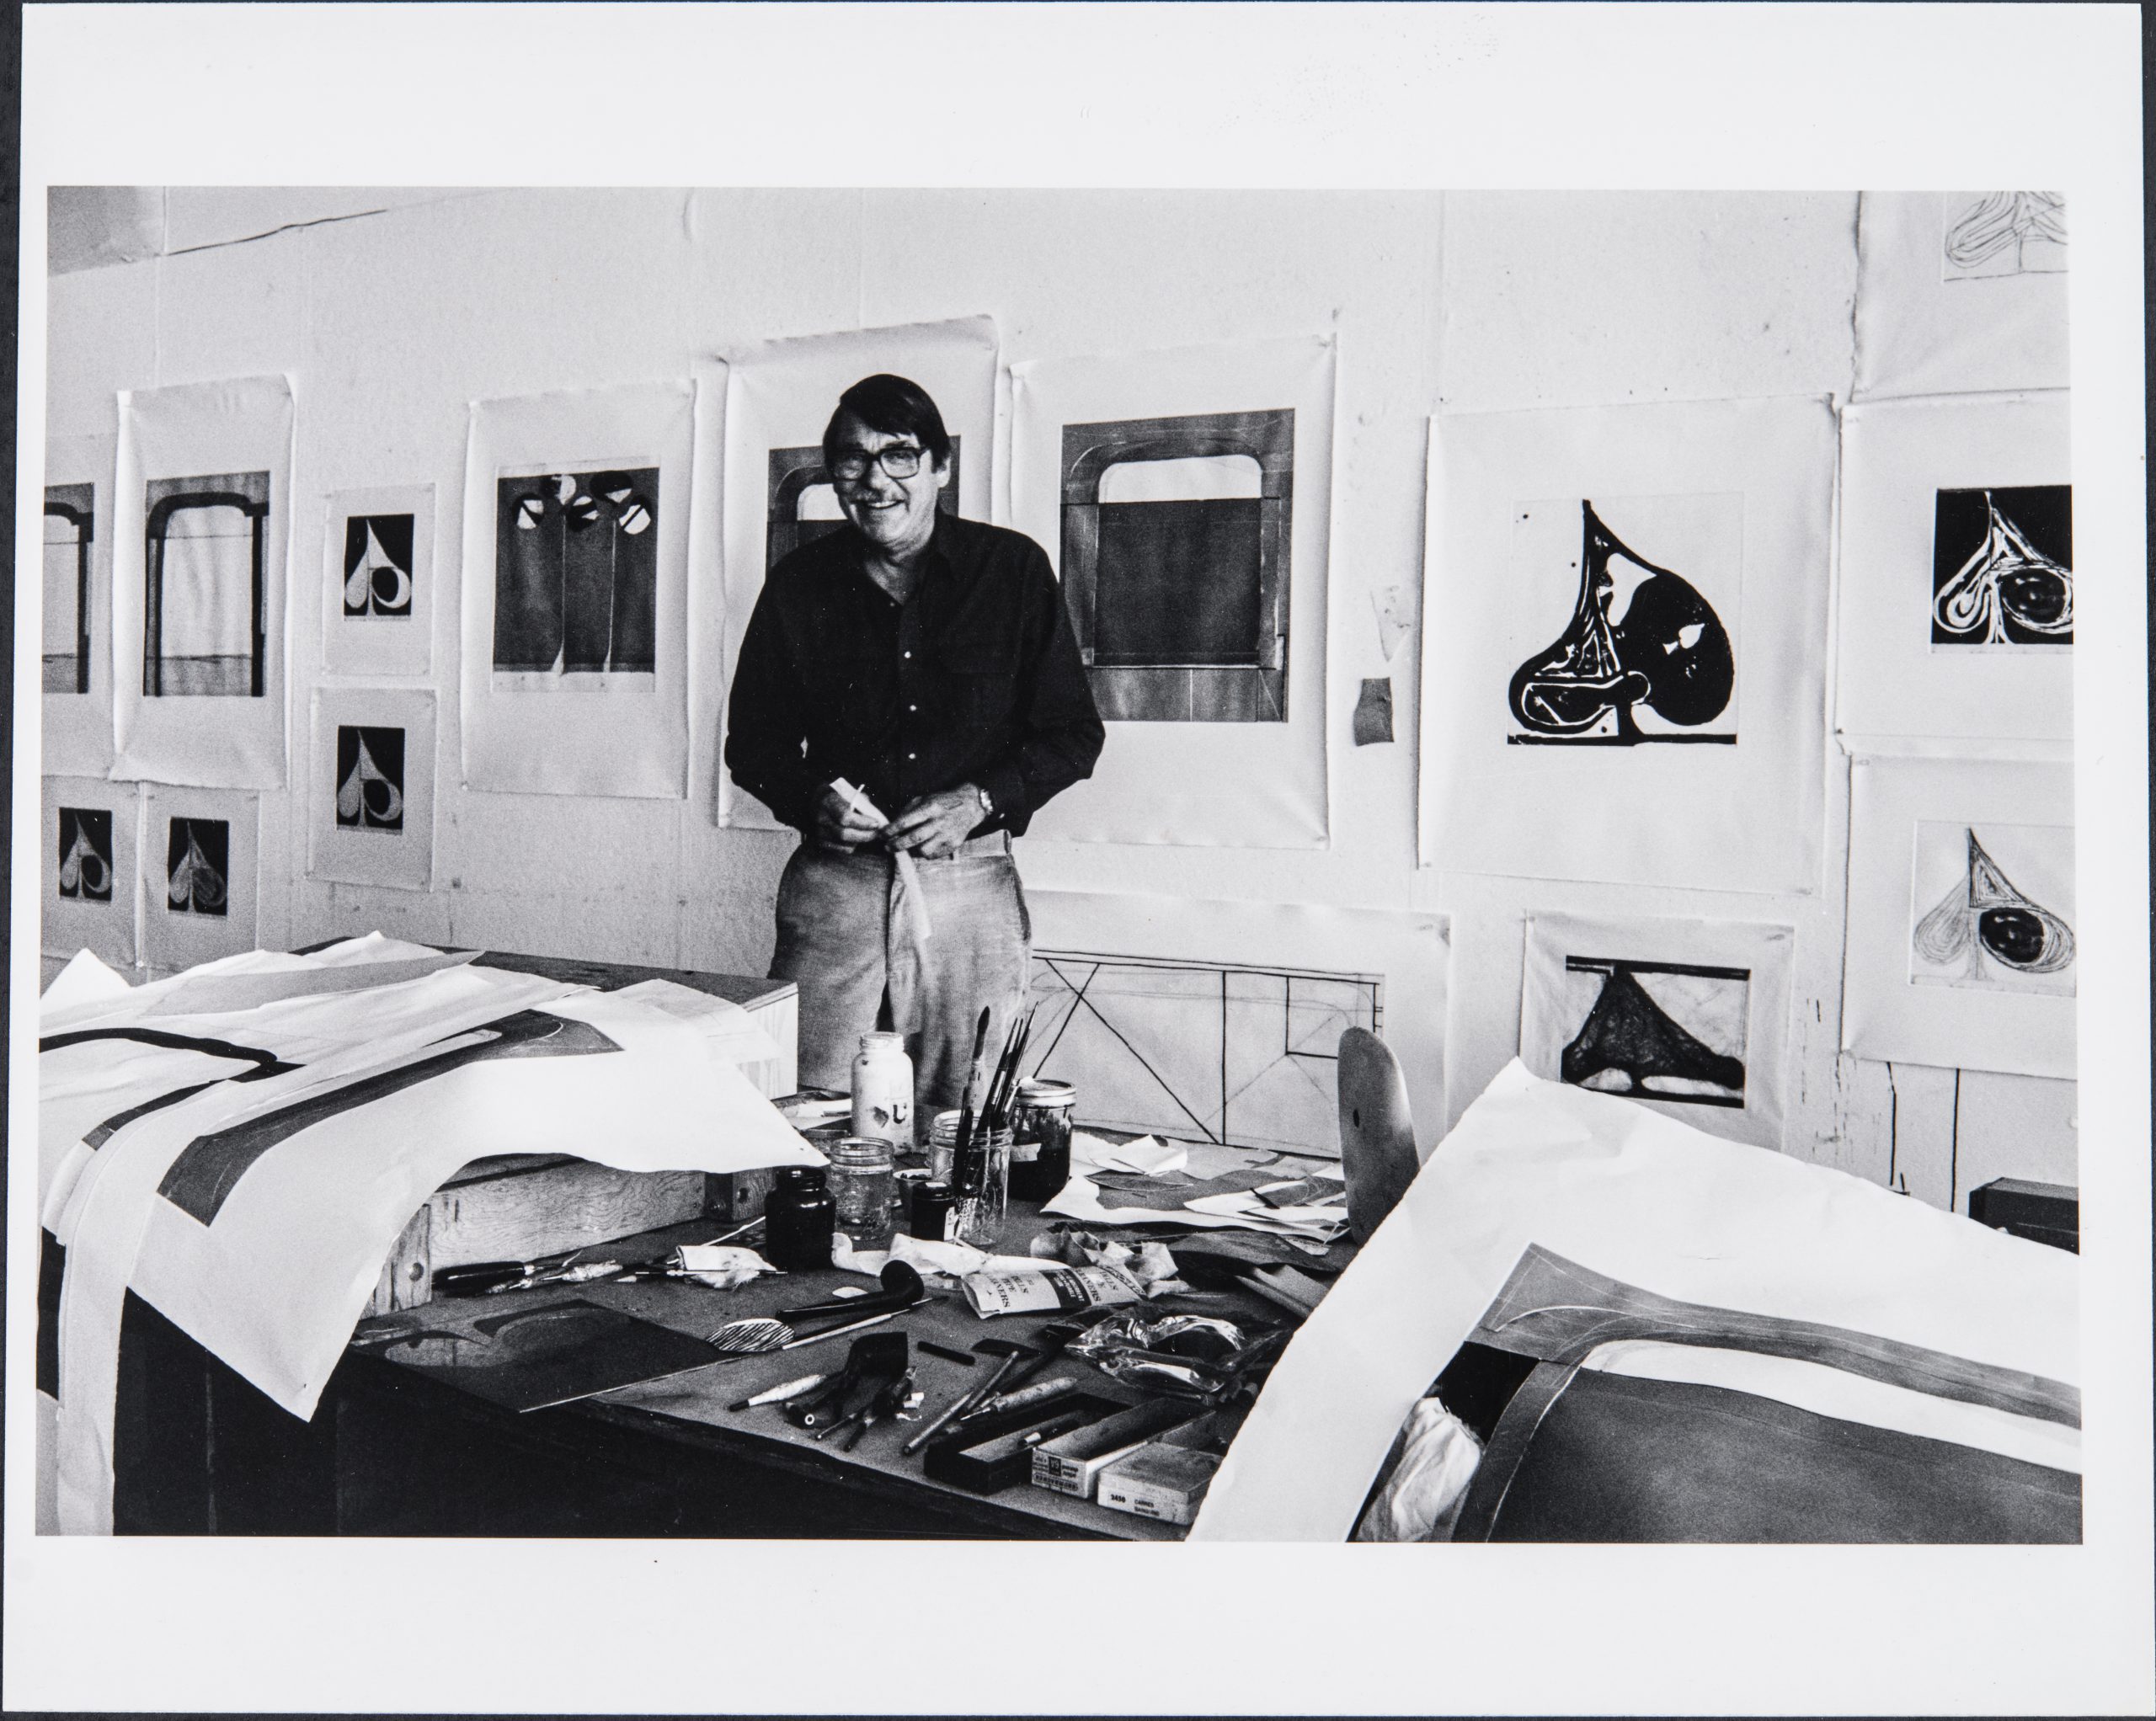 Courtesy of the Richard Diebenkorn Foundation Archives.